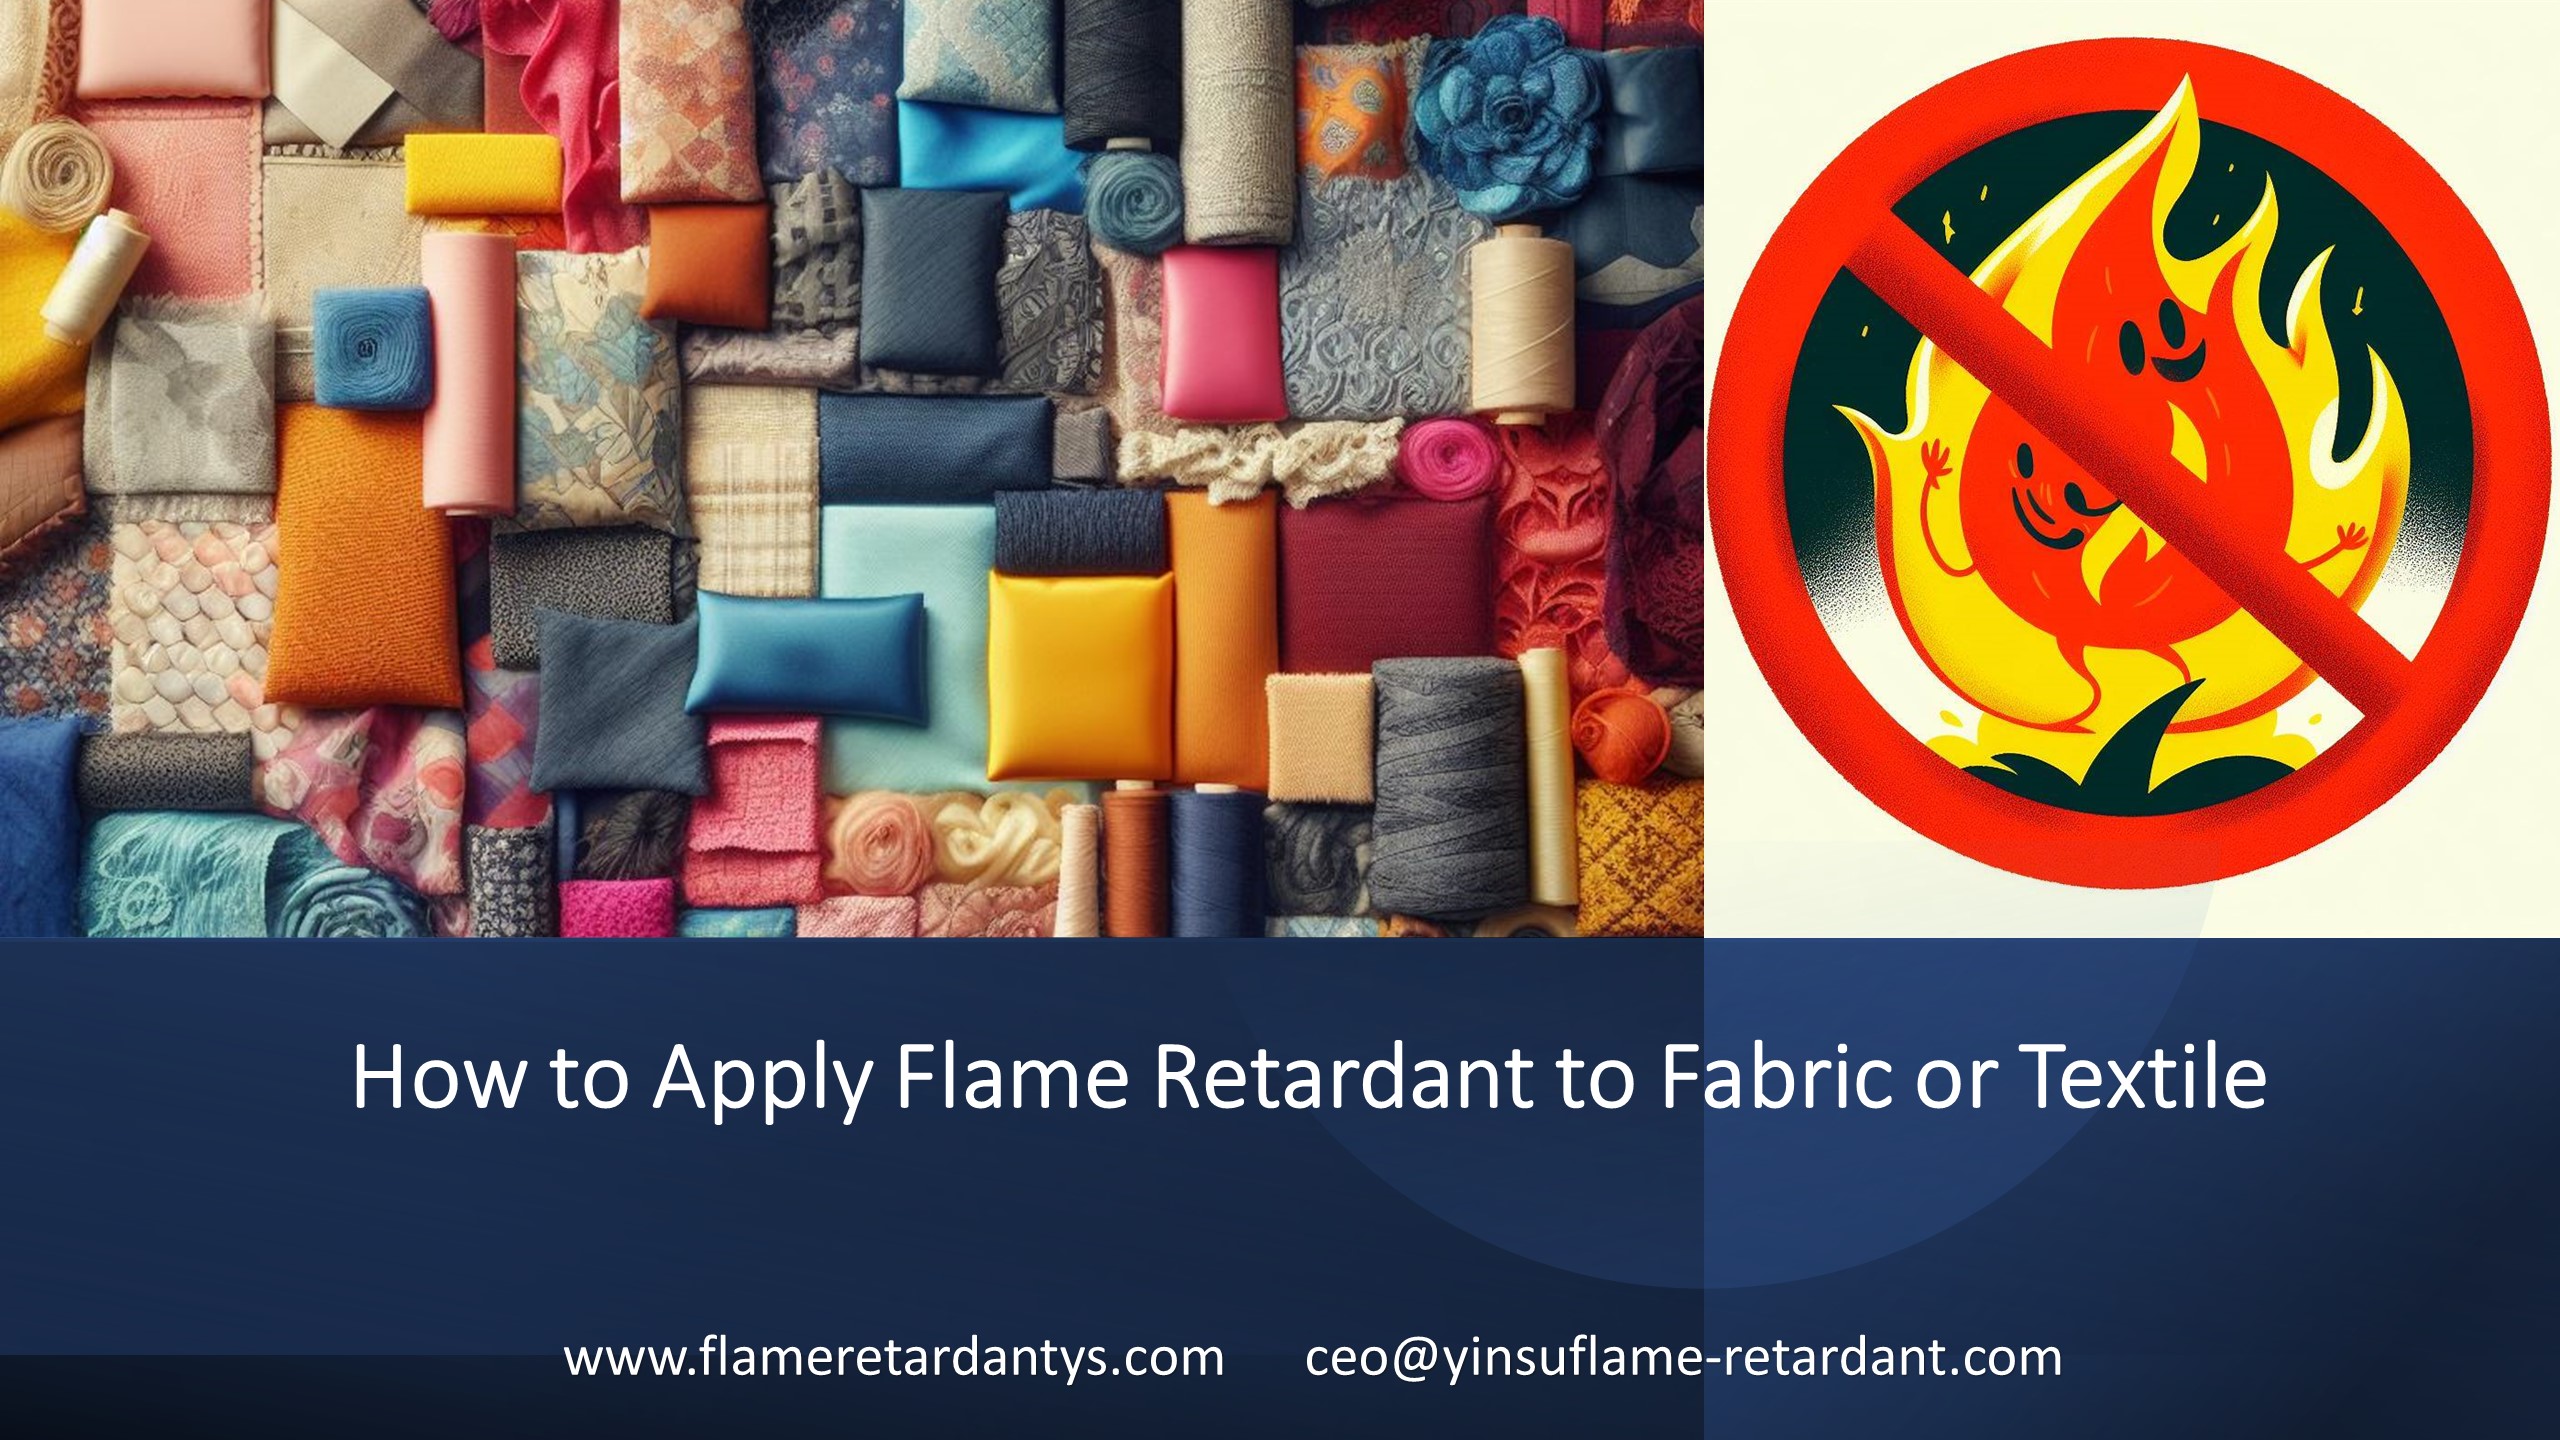 How To Apply Flame Retardant To Fabric Or Textile